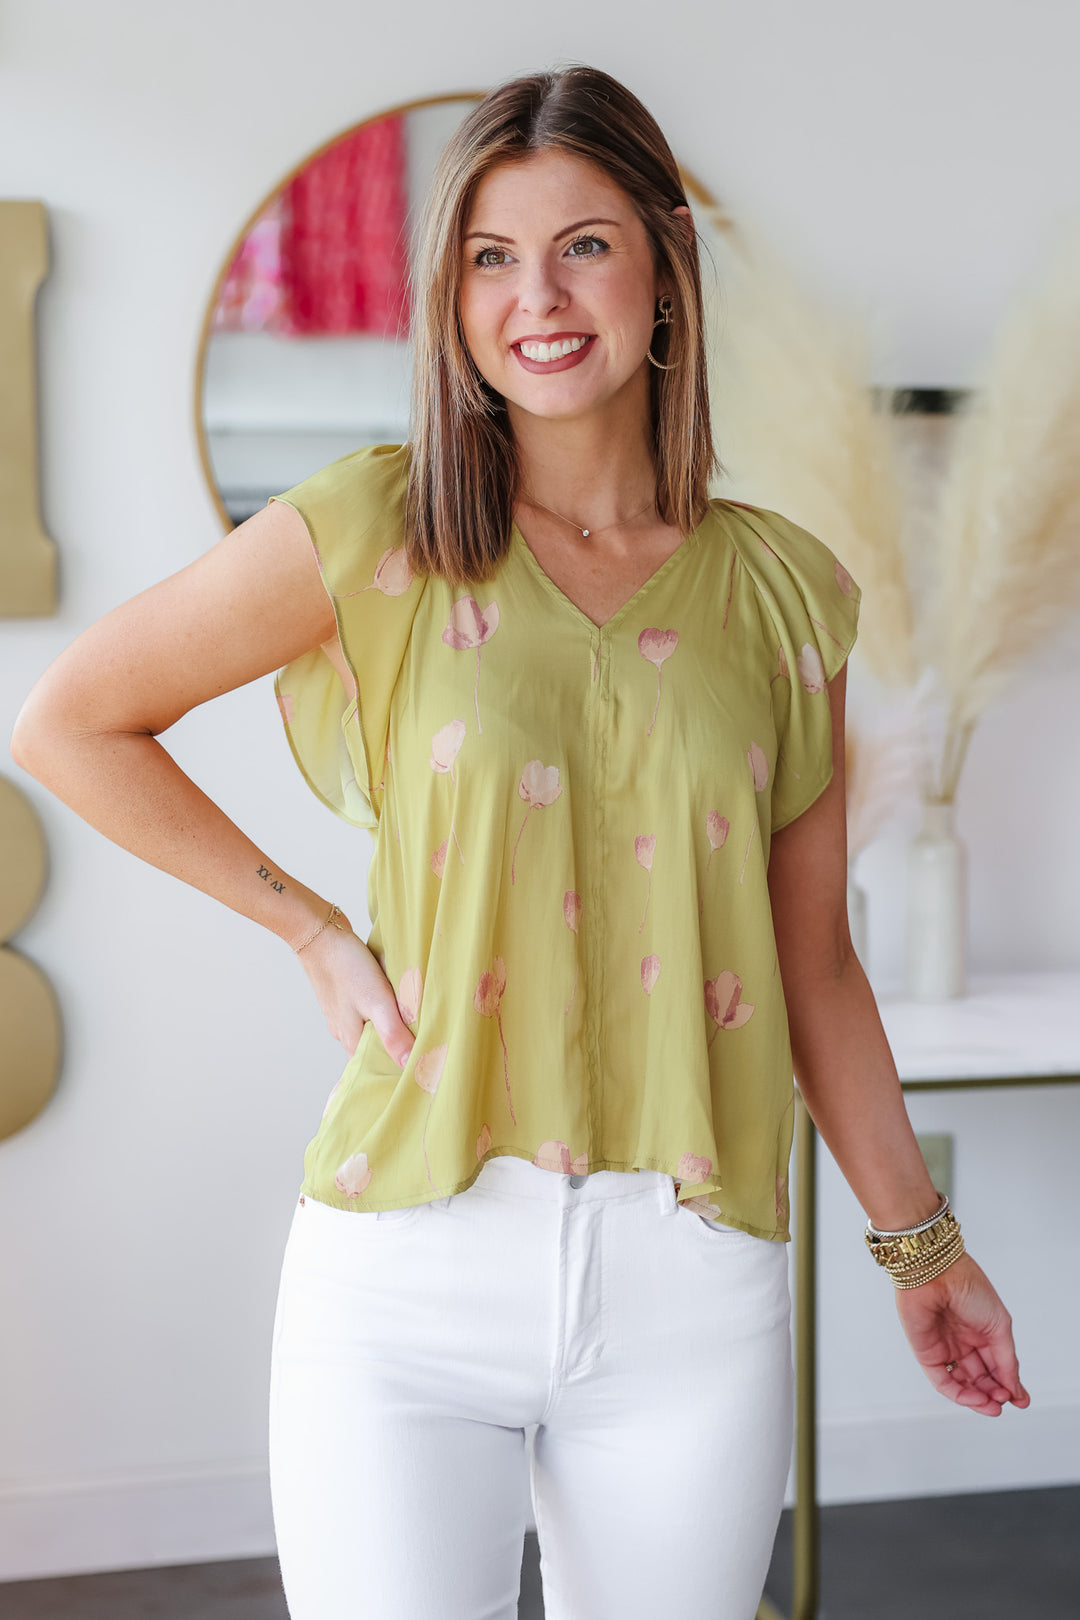 Image of brunette girl wearing a pink top standing inside Ivy House Boutique